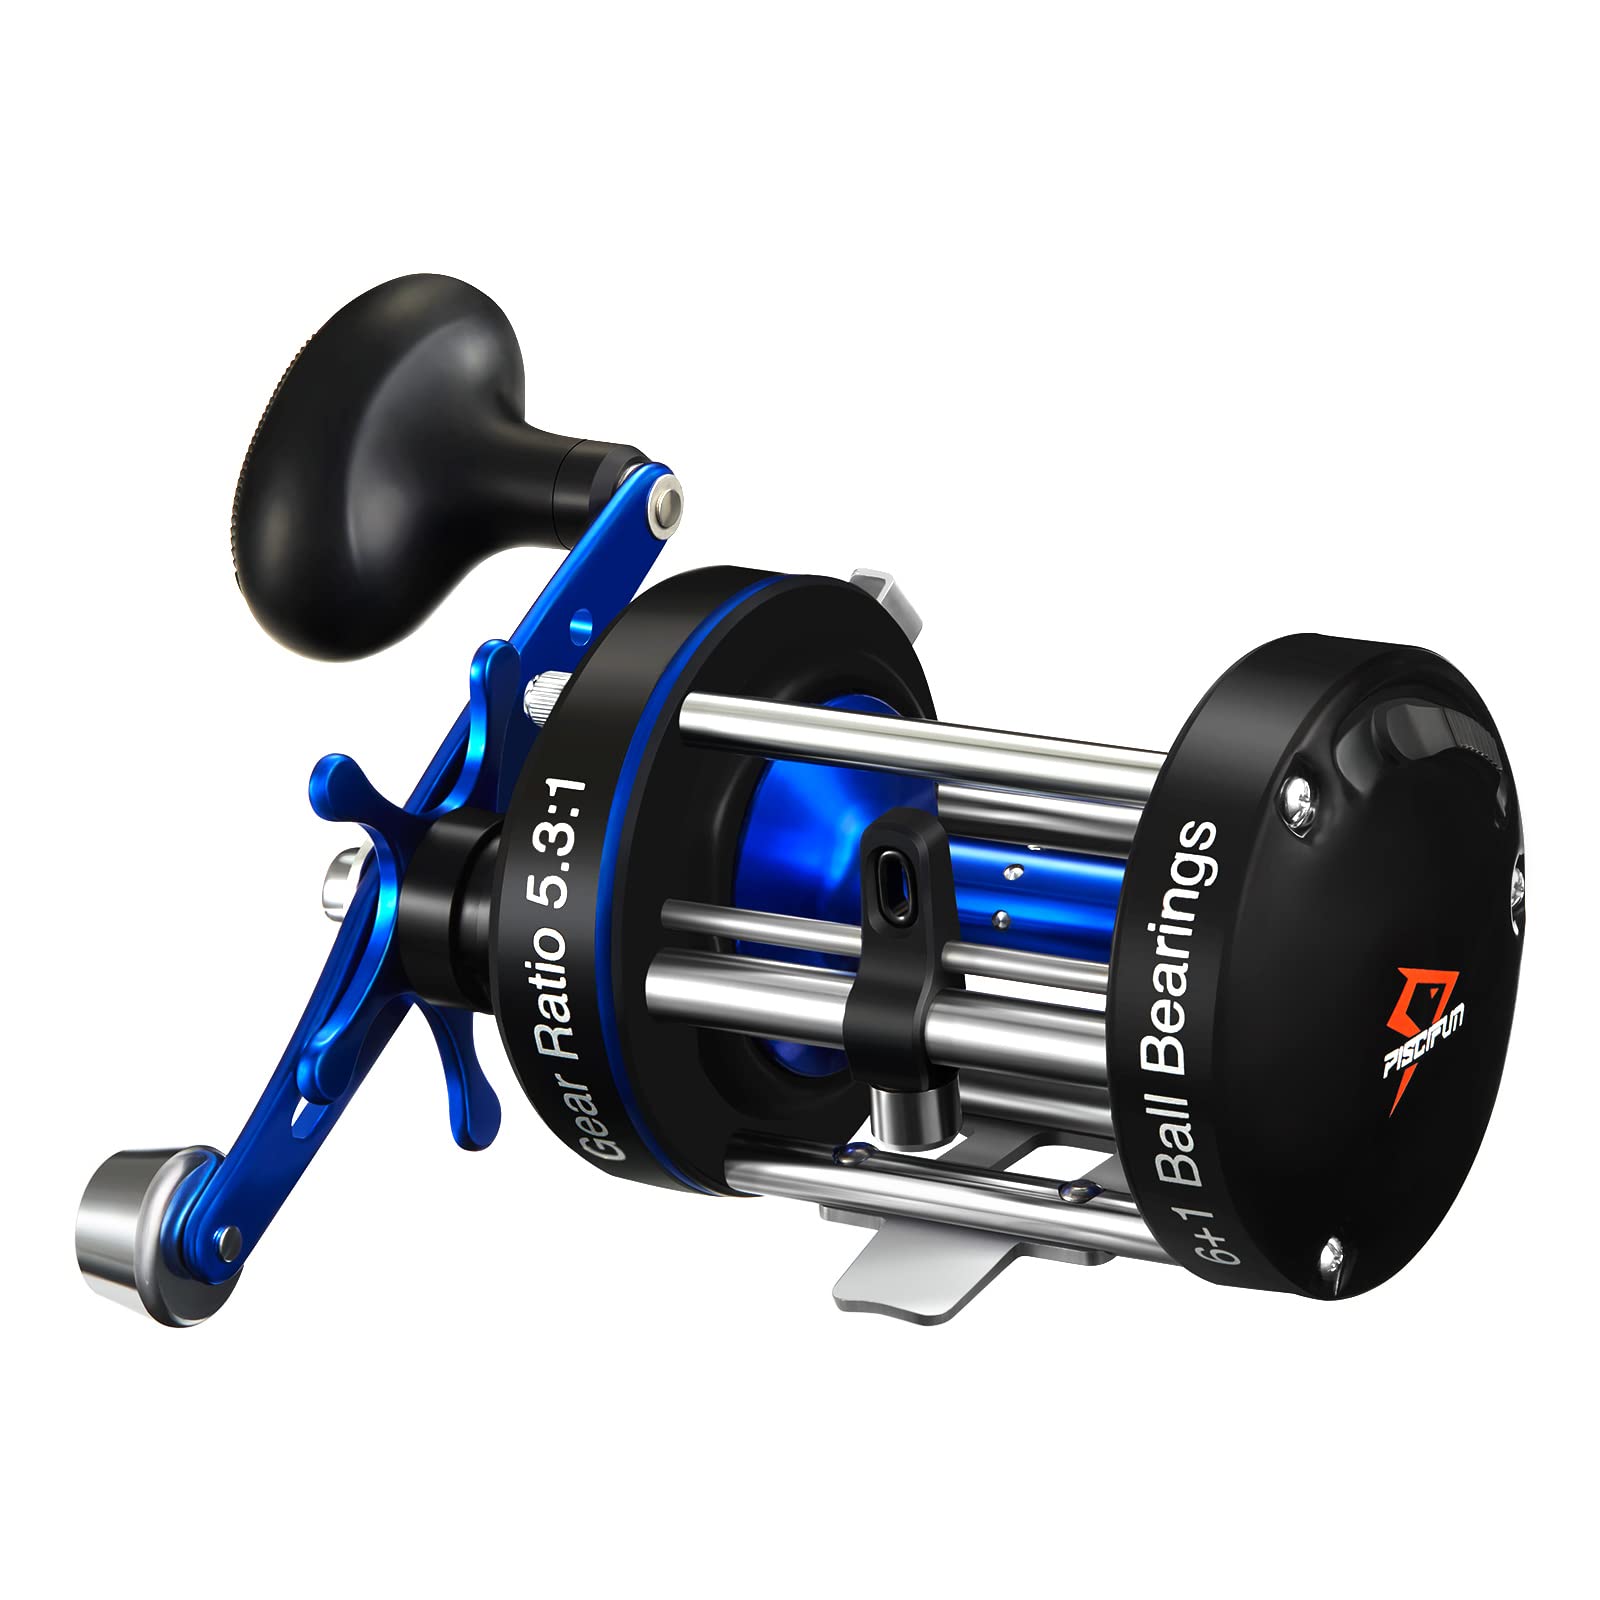 Piscifun Chaos XS Baitcasting Fishing Reel, Reinforced Metal Body Round Baitcaster  Reel, Smooth Powerful Saltwater Inshore